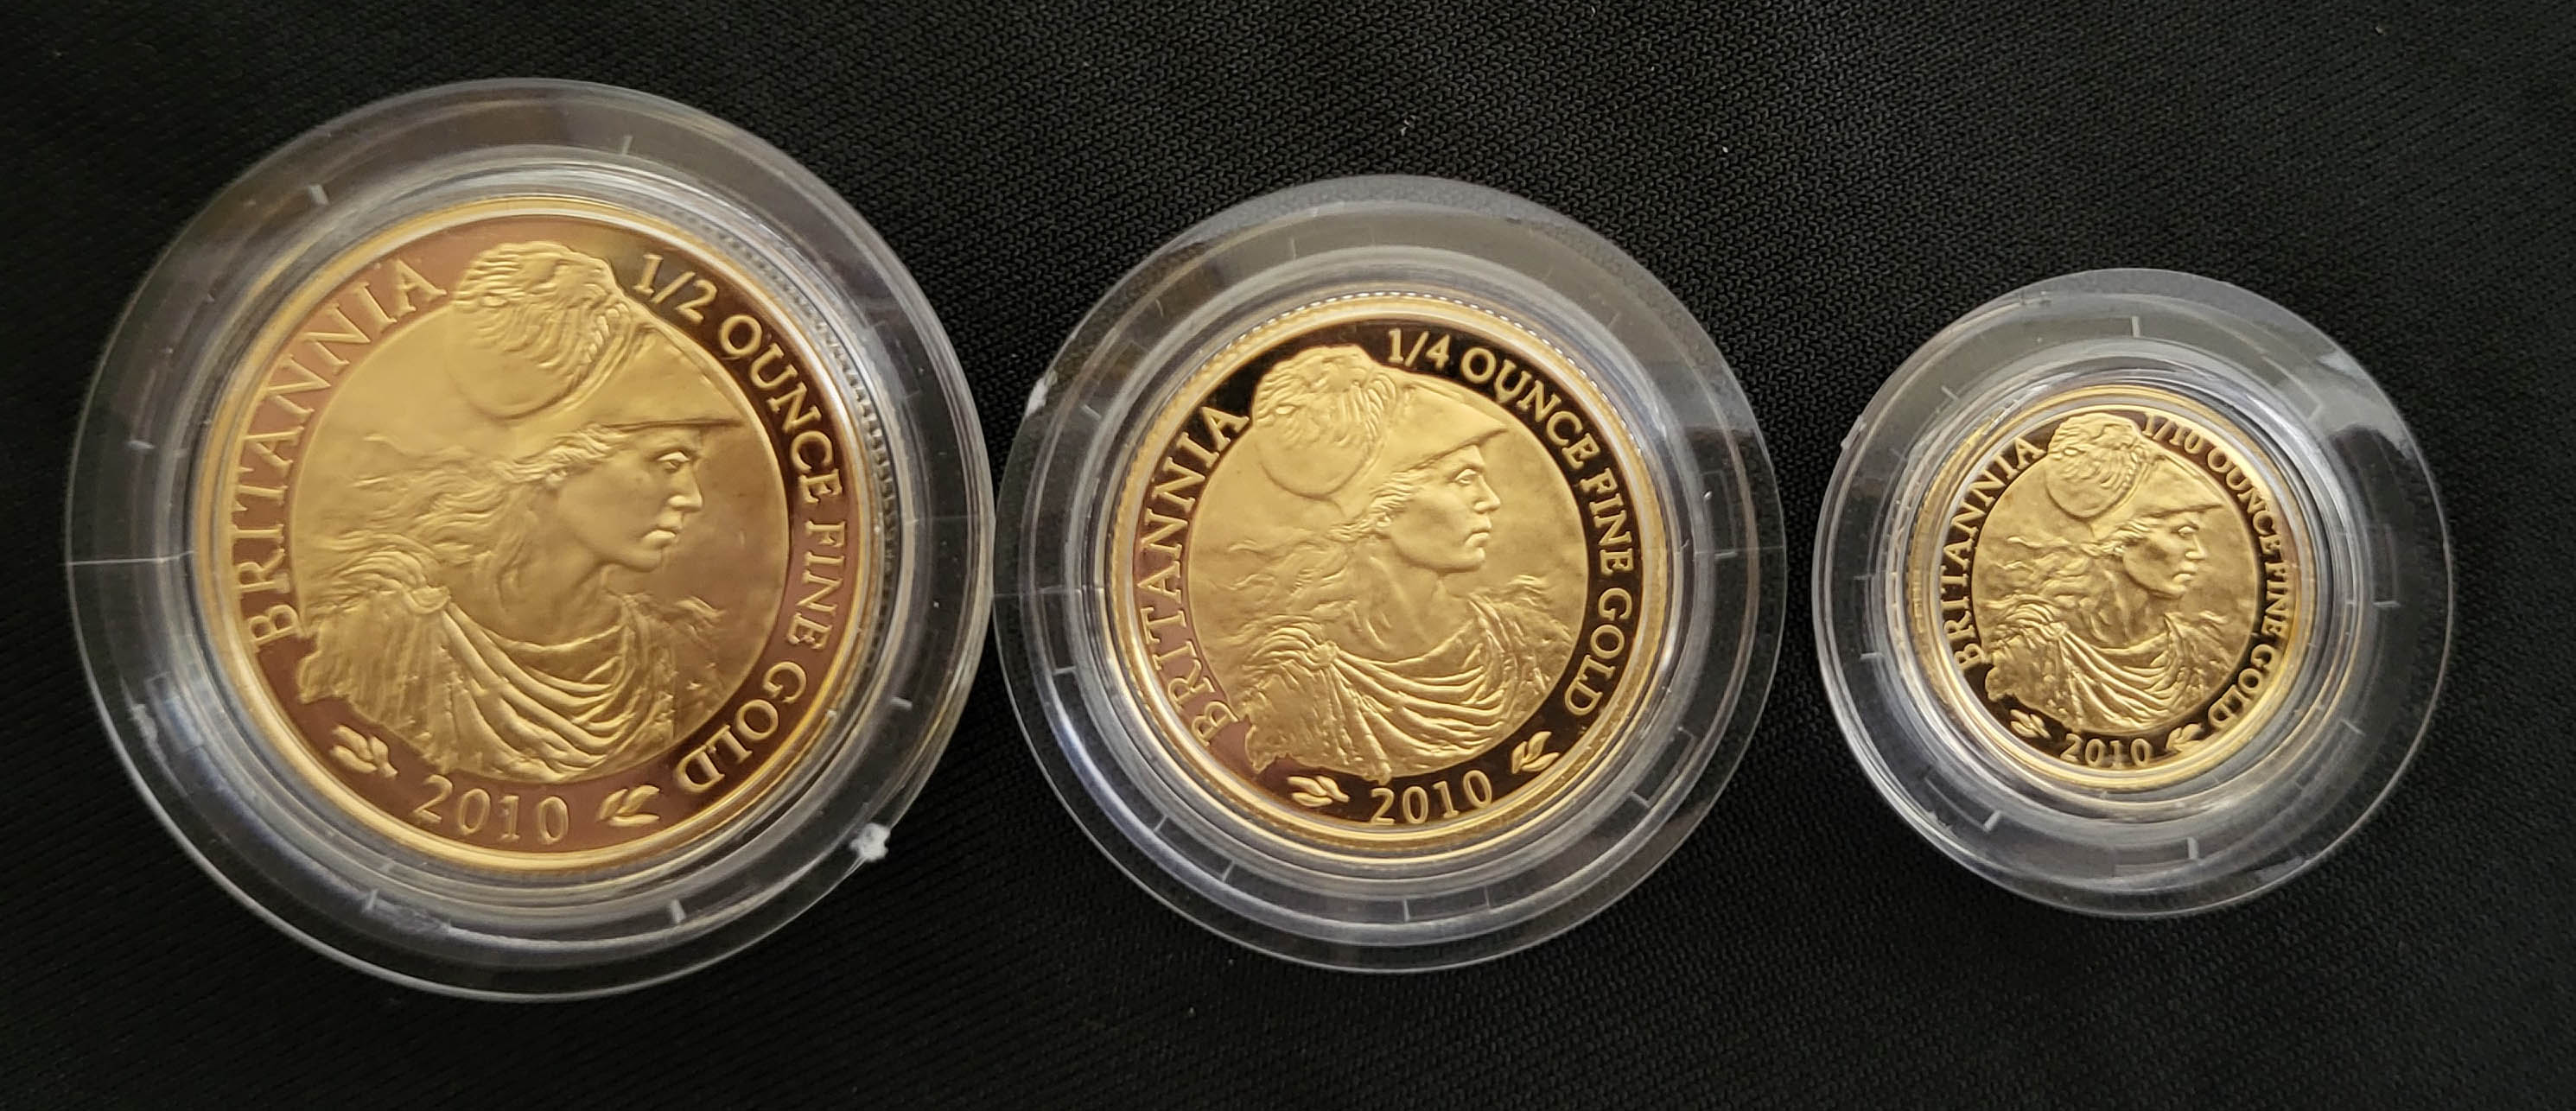 A 22CT GOLD BRITANNIA THREE COIN PROOF SET, DATED 2010 Comprising fifty pounds, twenty-five pounds - Image 2 of 5